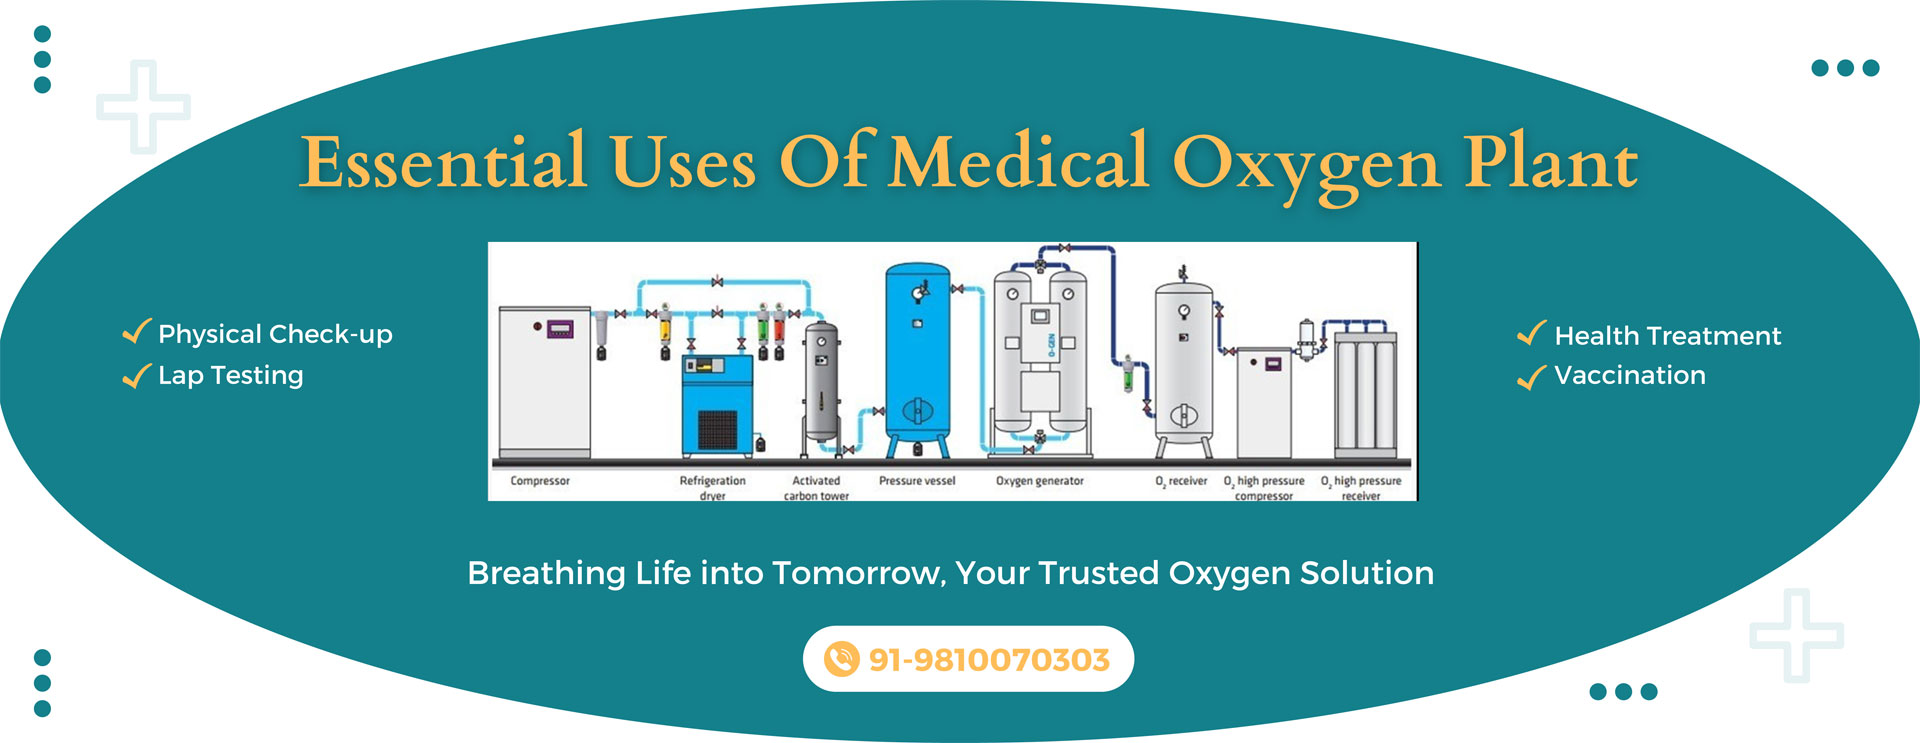 Essential Uses Of Medical Oxygen Plant